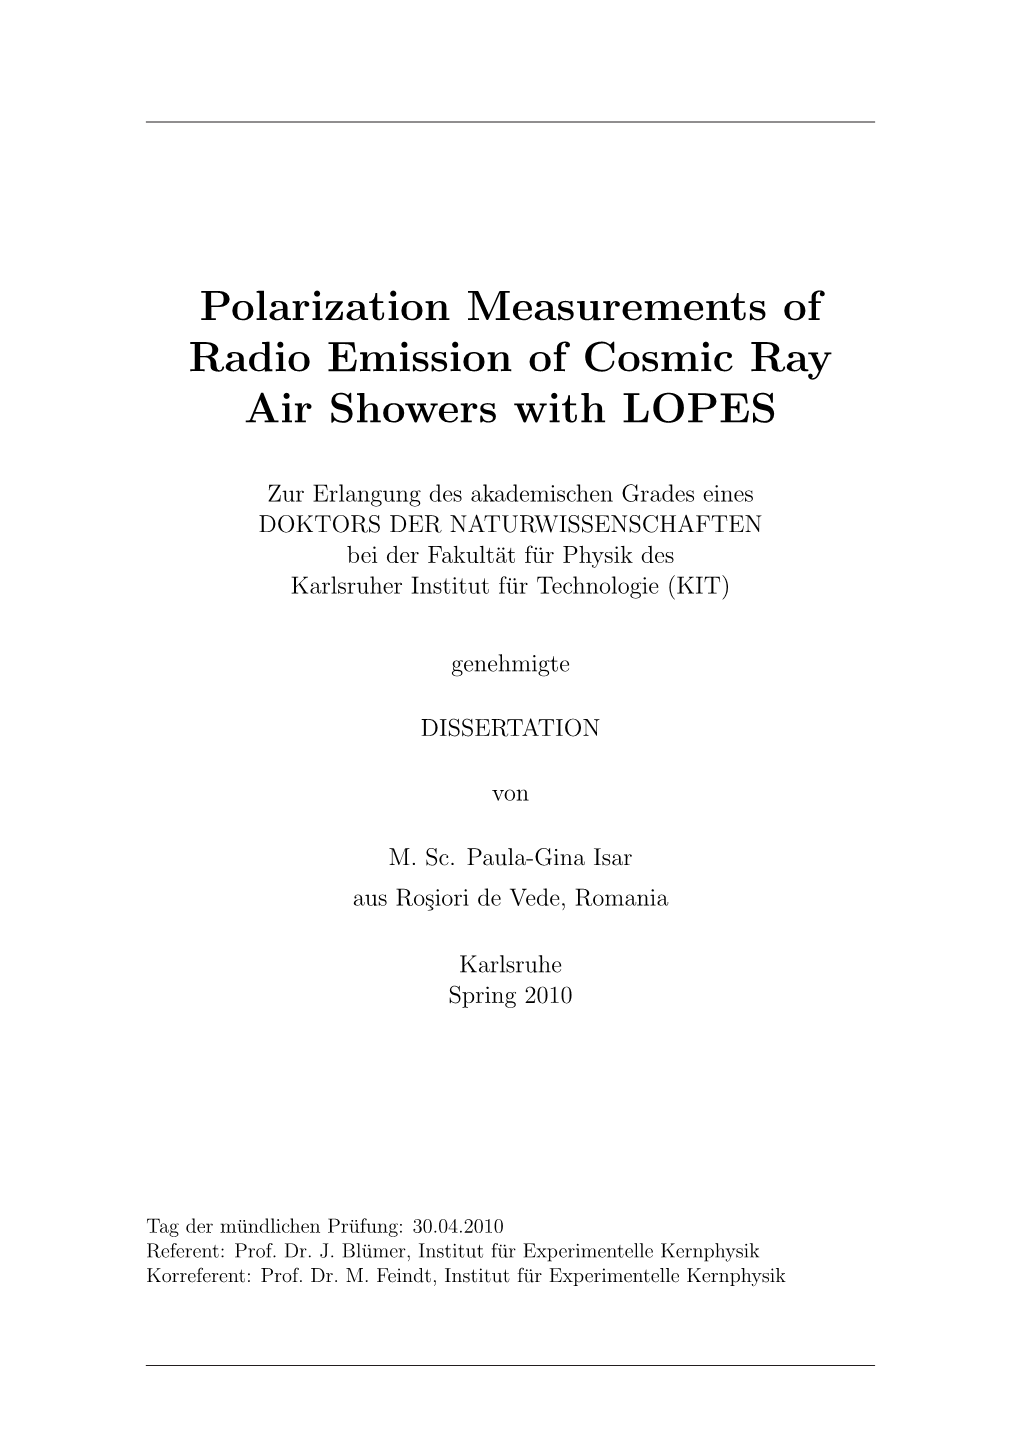 Polarization Measurements of Radio Emission of Cosmic Ray Air Showers with LOPES